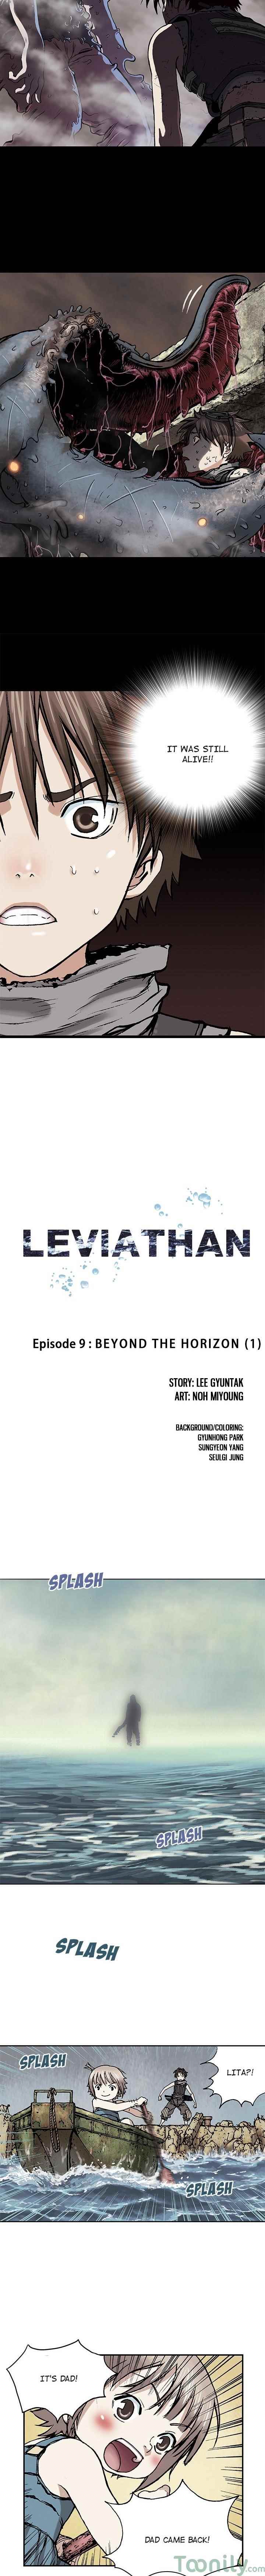 Leviathan Chapter 9 scans online, Read Leviathan Chapter 9 in english, read Leviathan Chapter 9 for free, Leviathan Chapter 9 void scans, Leviathan Chapter 9 void scans, , Leviathan Chapter 9 at void scans